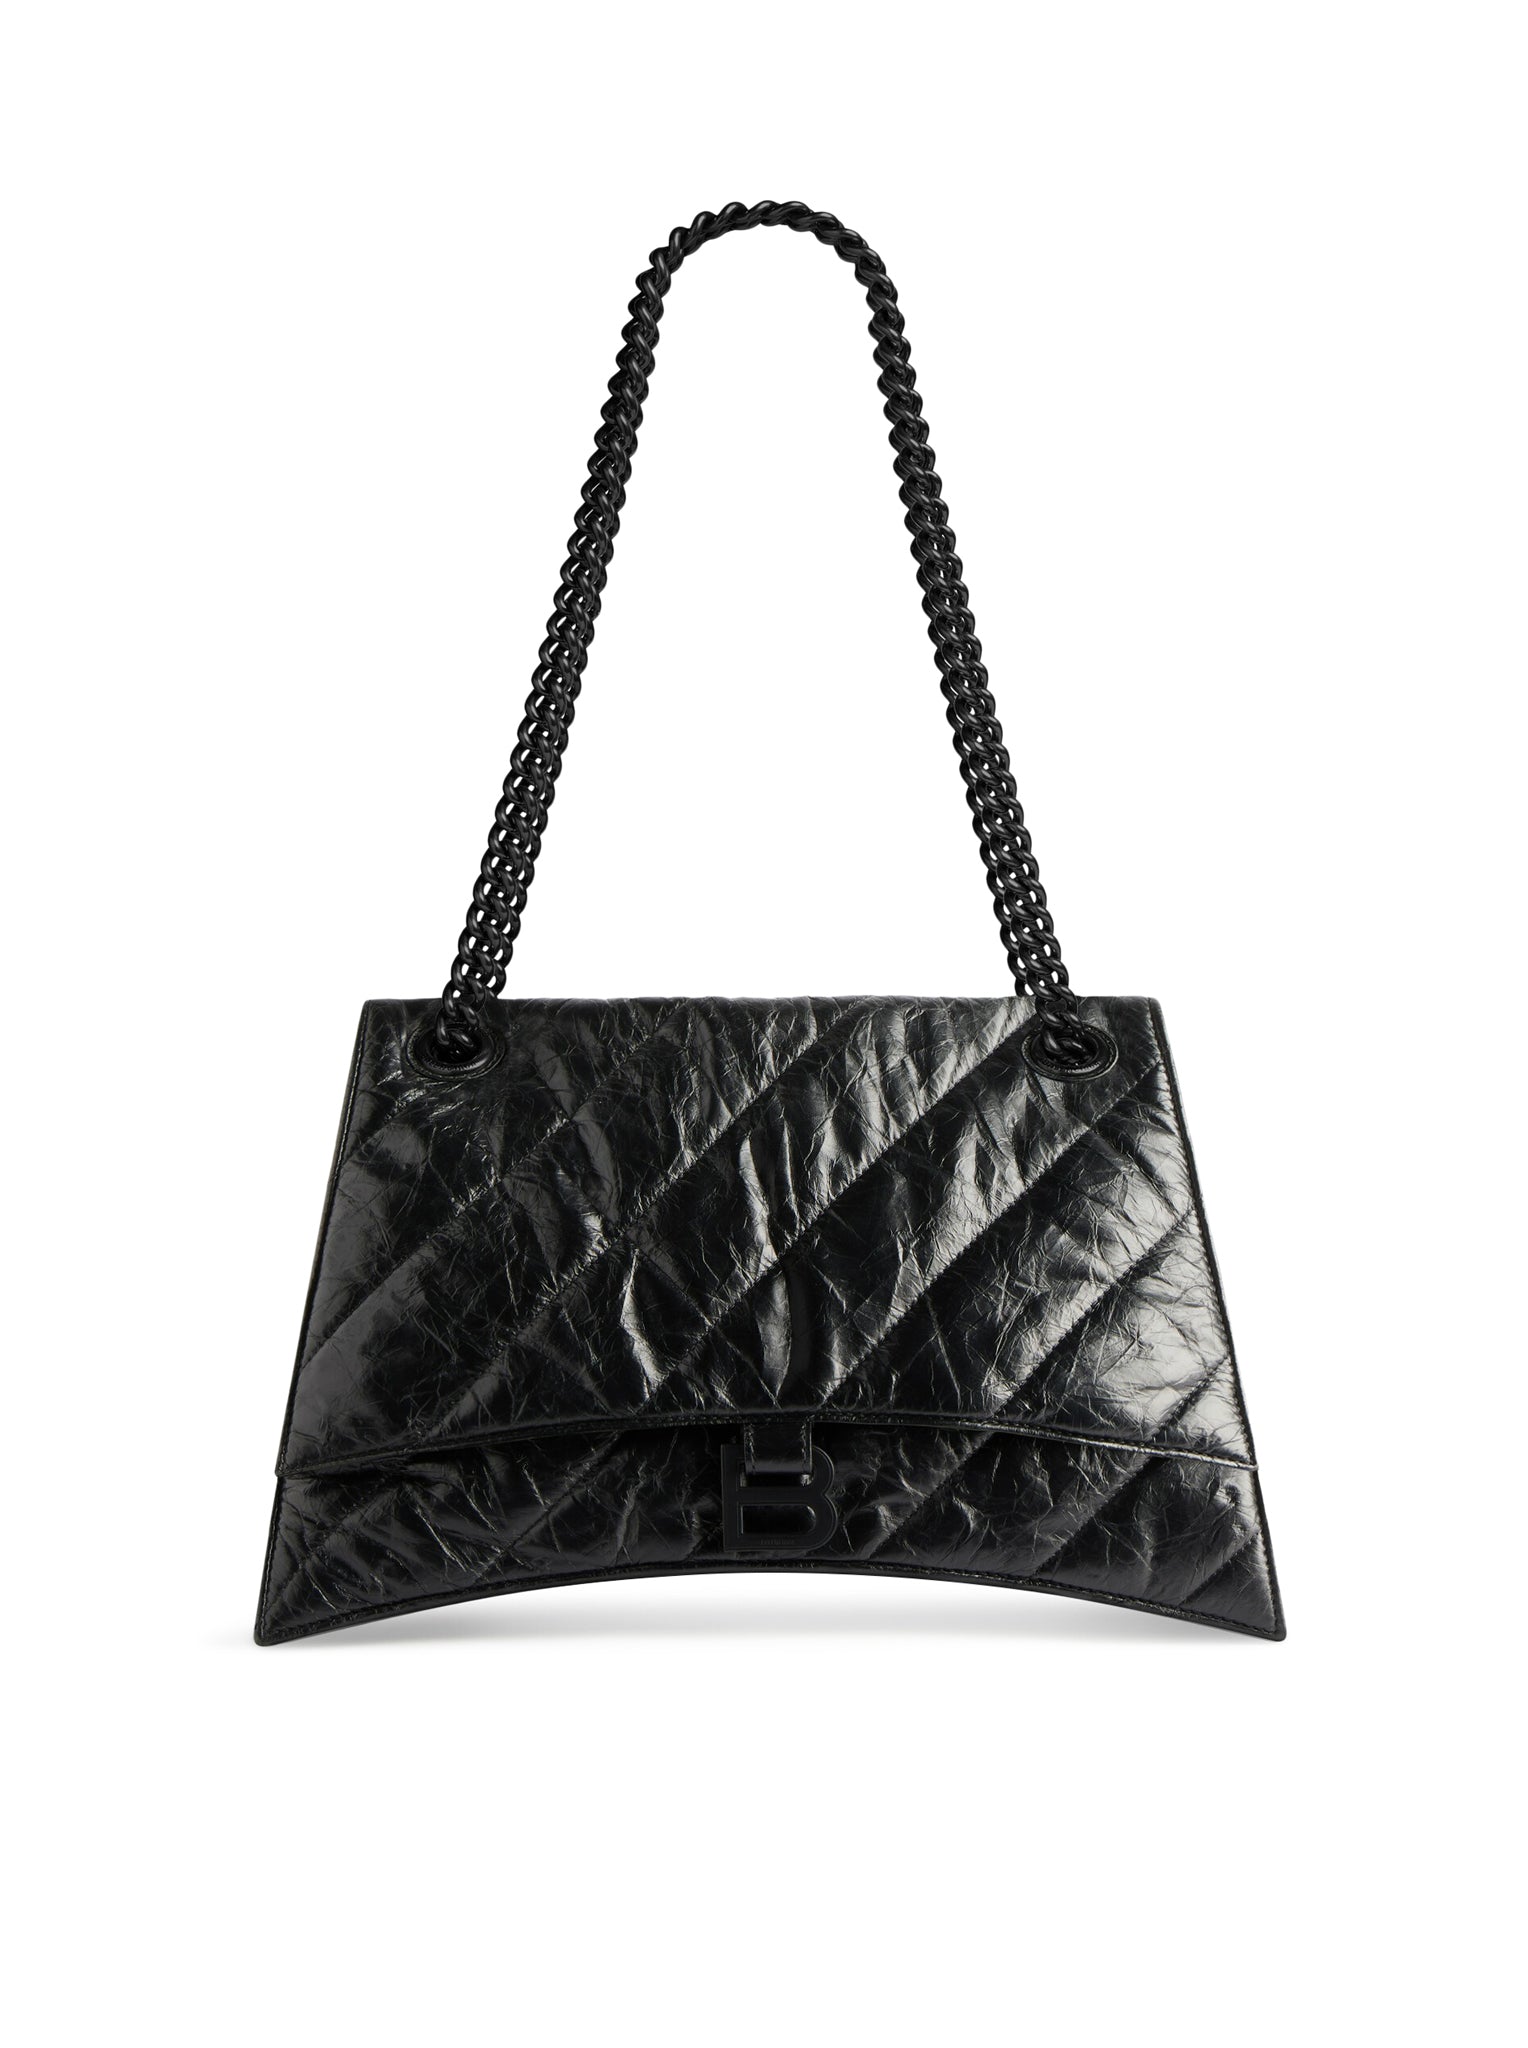 MEDIUM QUILTED CRUSH BAG WITH CHAIN FOR WOMEN IN BLACK